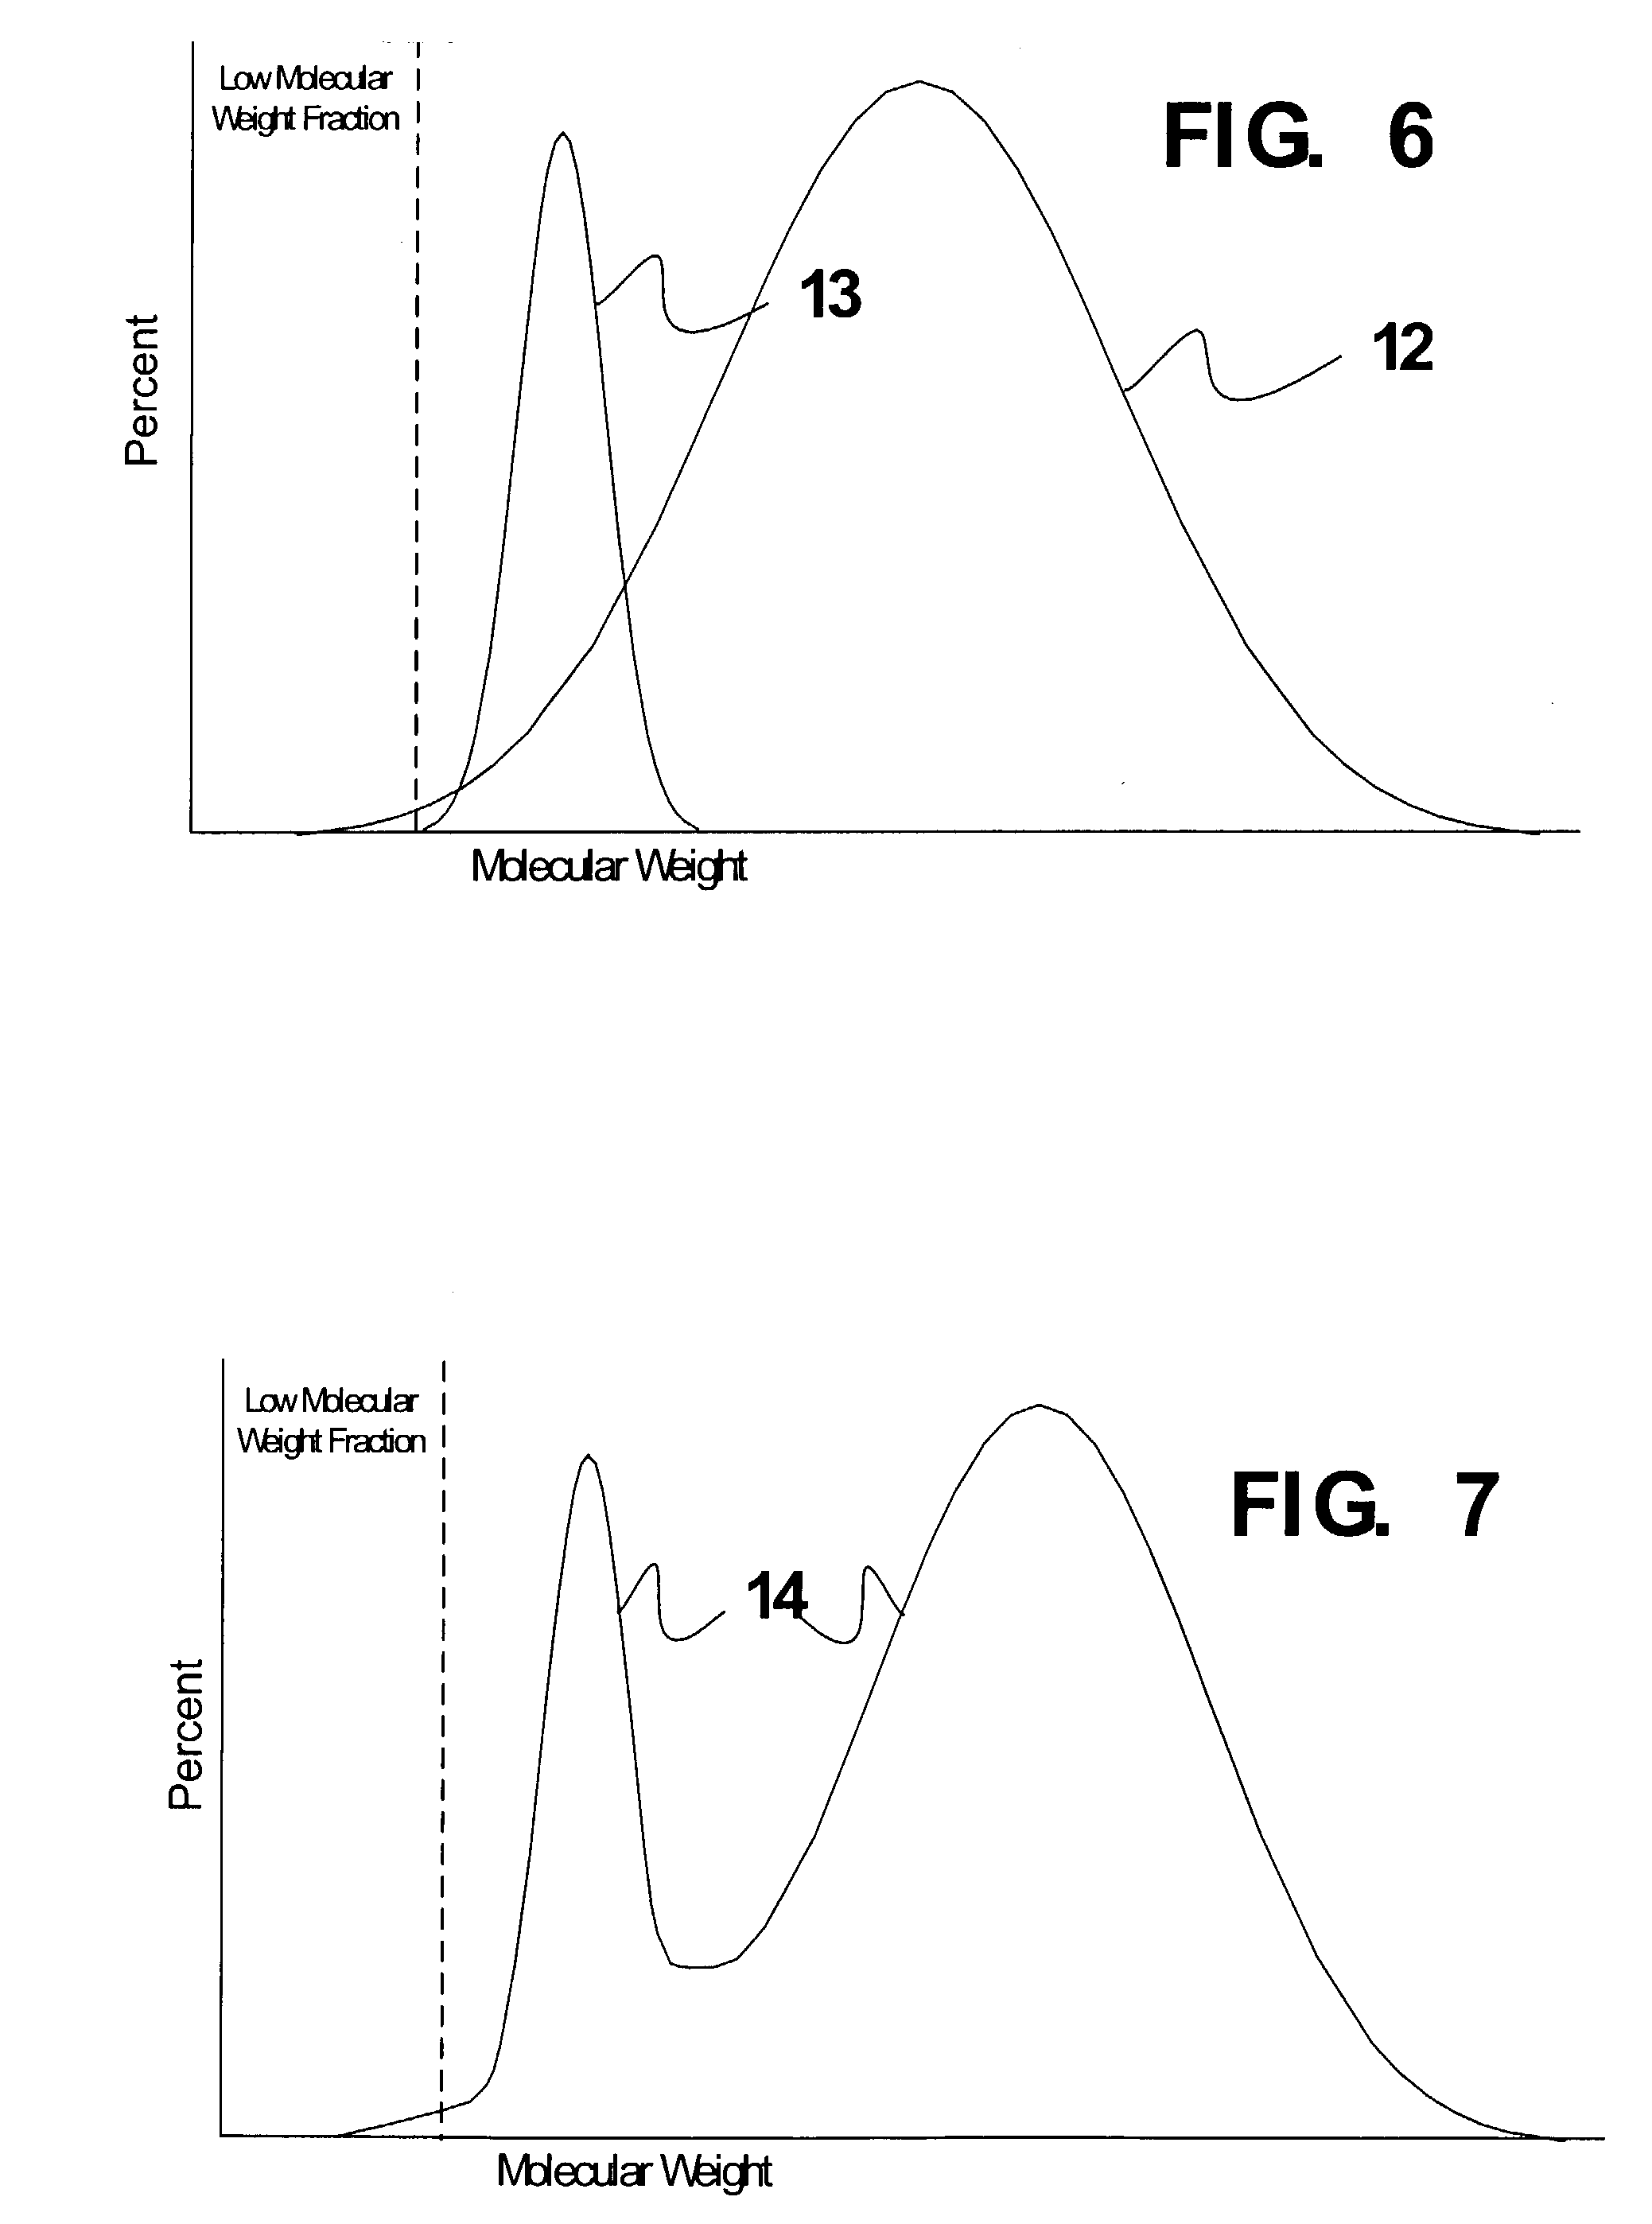 Melt blended high density polyethylene compositions with enhanced properties and method for producing the same